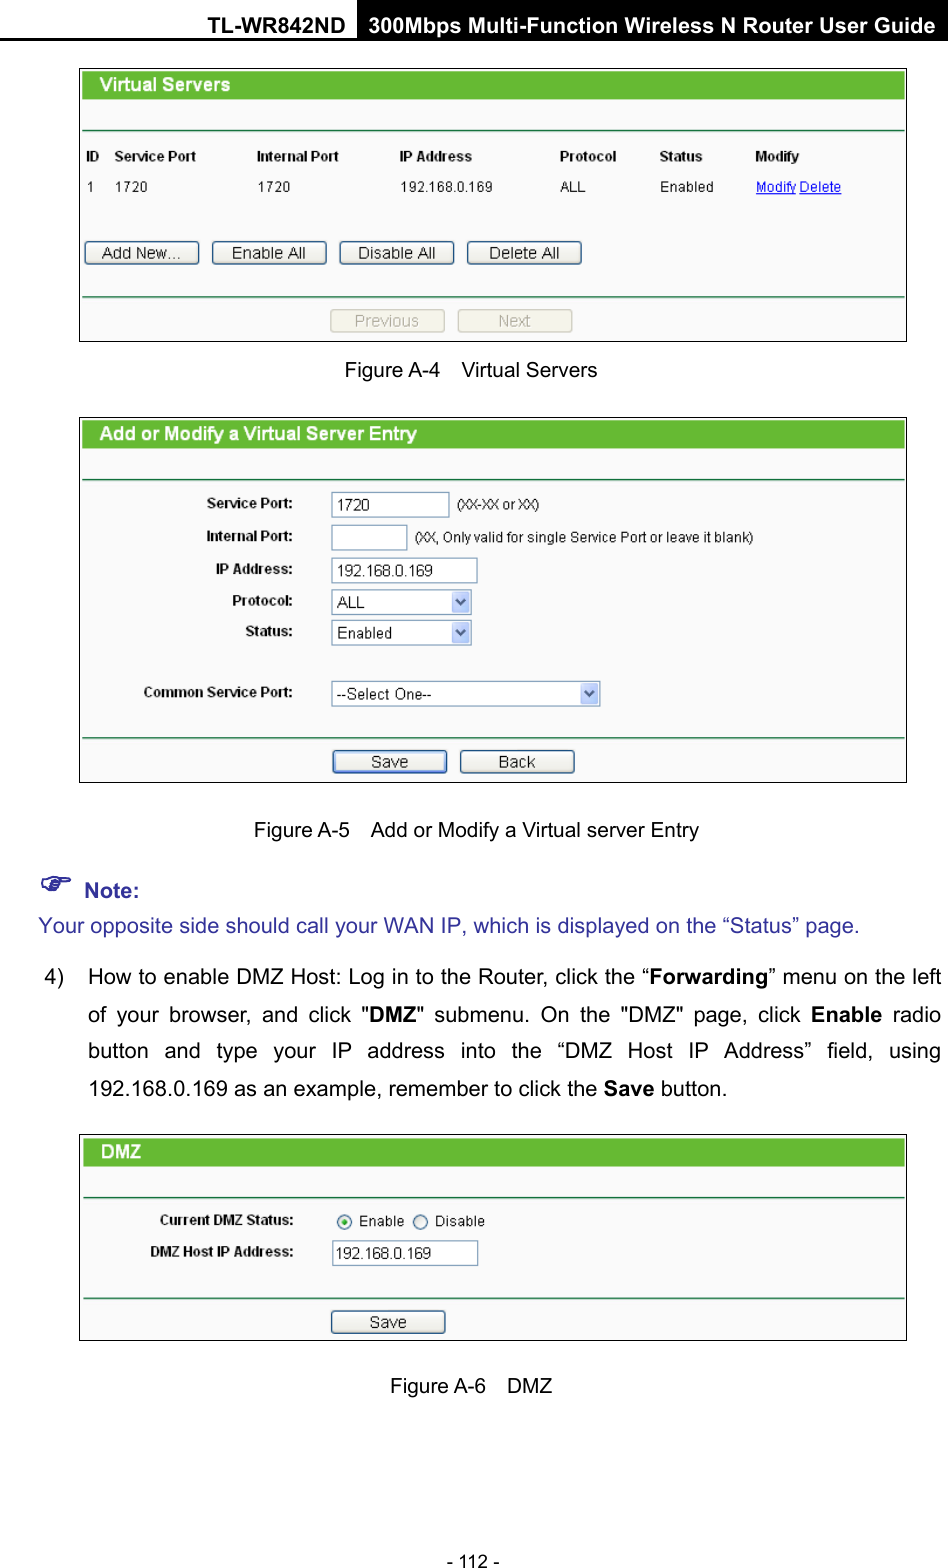 TL-WR842ND 300Mbps Multi-Function Wireless N Router User Guide  - 112 -  Figure A-4    Virtual Servers   Figure A-5   Add or Modify a Virtual server Entry  Note: Your opposite side should call your WAN IP, which is displayed on the “Status” page. 4) How to enable DMZ Host: Log in to the Router, click the “Forwarding” menu on the left of your browser, and click &quot;DMZ&quot; submenu. On the &quot;DMZ&quot; page, click Enable radio button and type your IP address into the “DMZ Host IP Address” field, using 192.168.0.169 as an example, remember to click the Save button.    Figure A-6  DMZ 